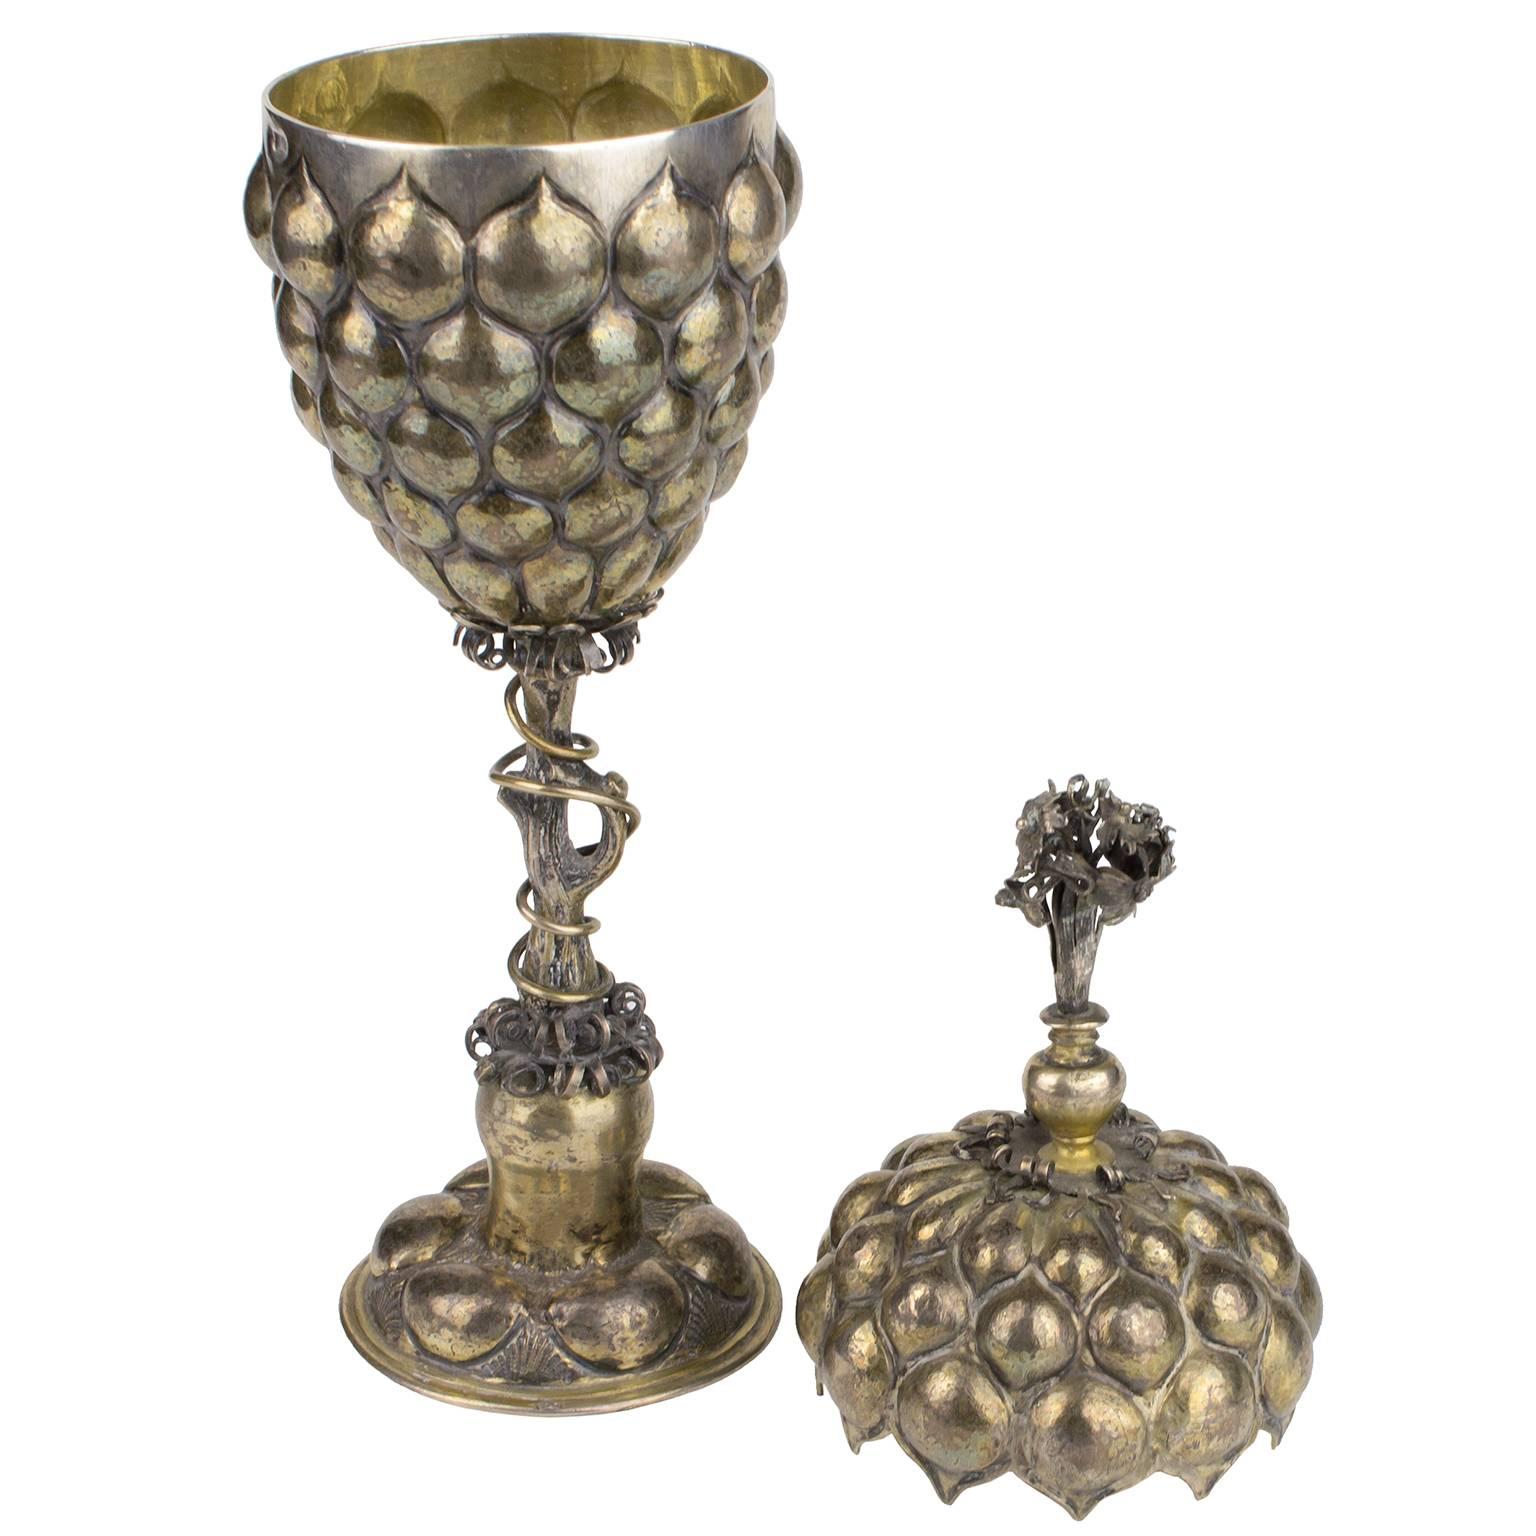 17th Century German Silver Ceremonial Cup For Sale